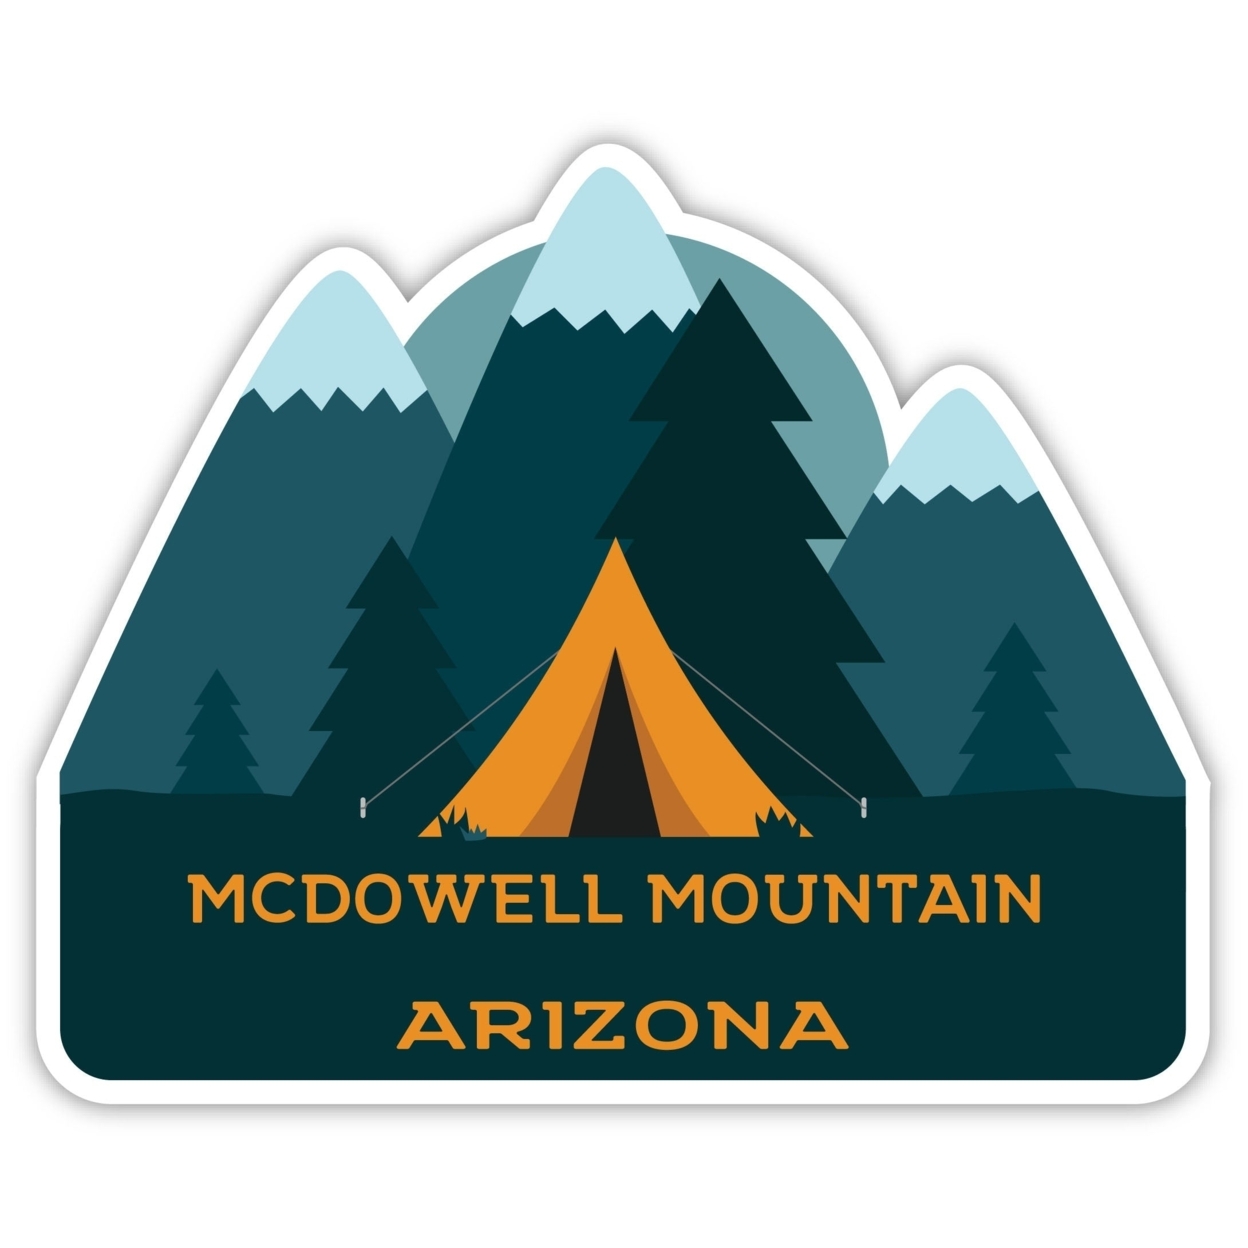 Mcdowell Mountain Arizona Souvenir Decorative Stickers (Choose Theme And Size) - 2-Inch, Tent